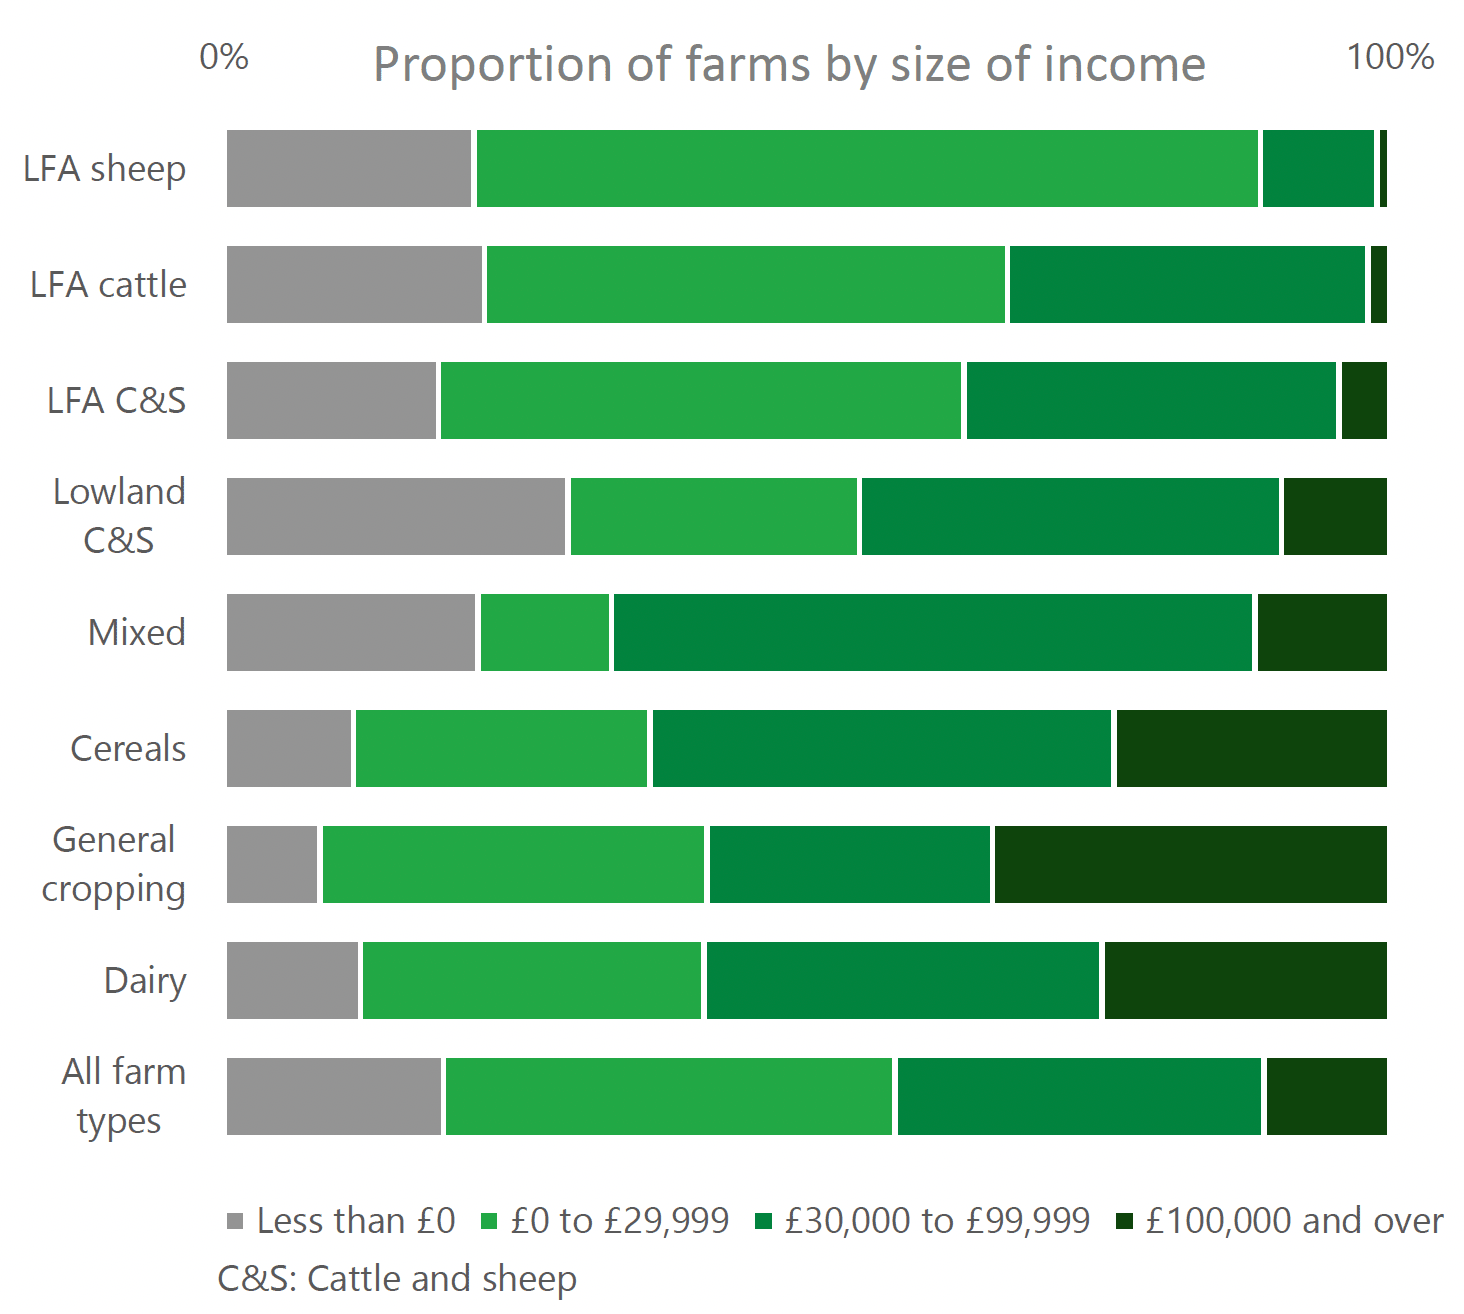 Bar charts show, for different farm types, the proportion of farms which made a profit in 2020-21 with and without support payments.